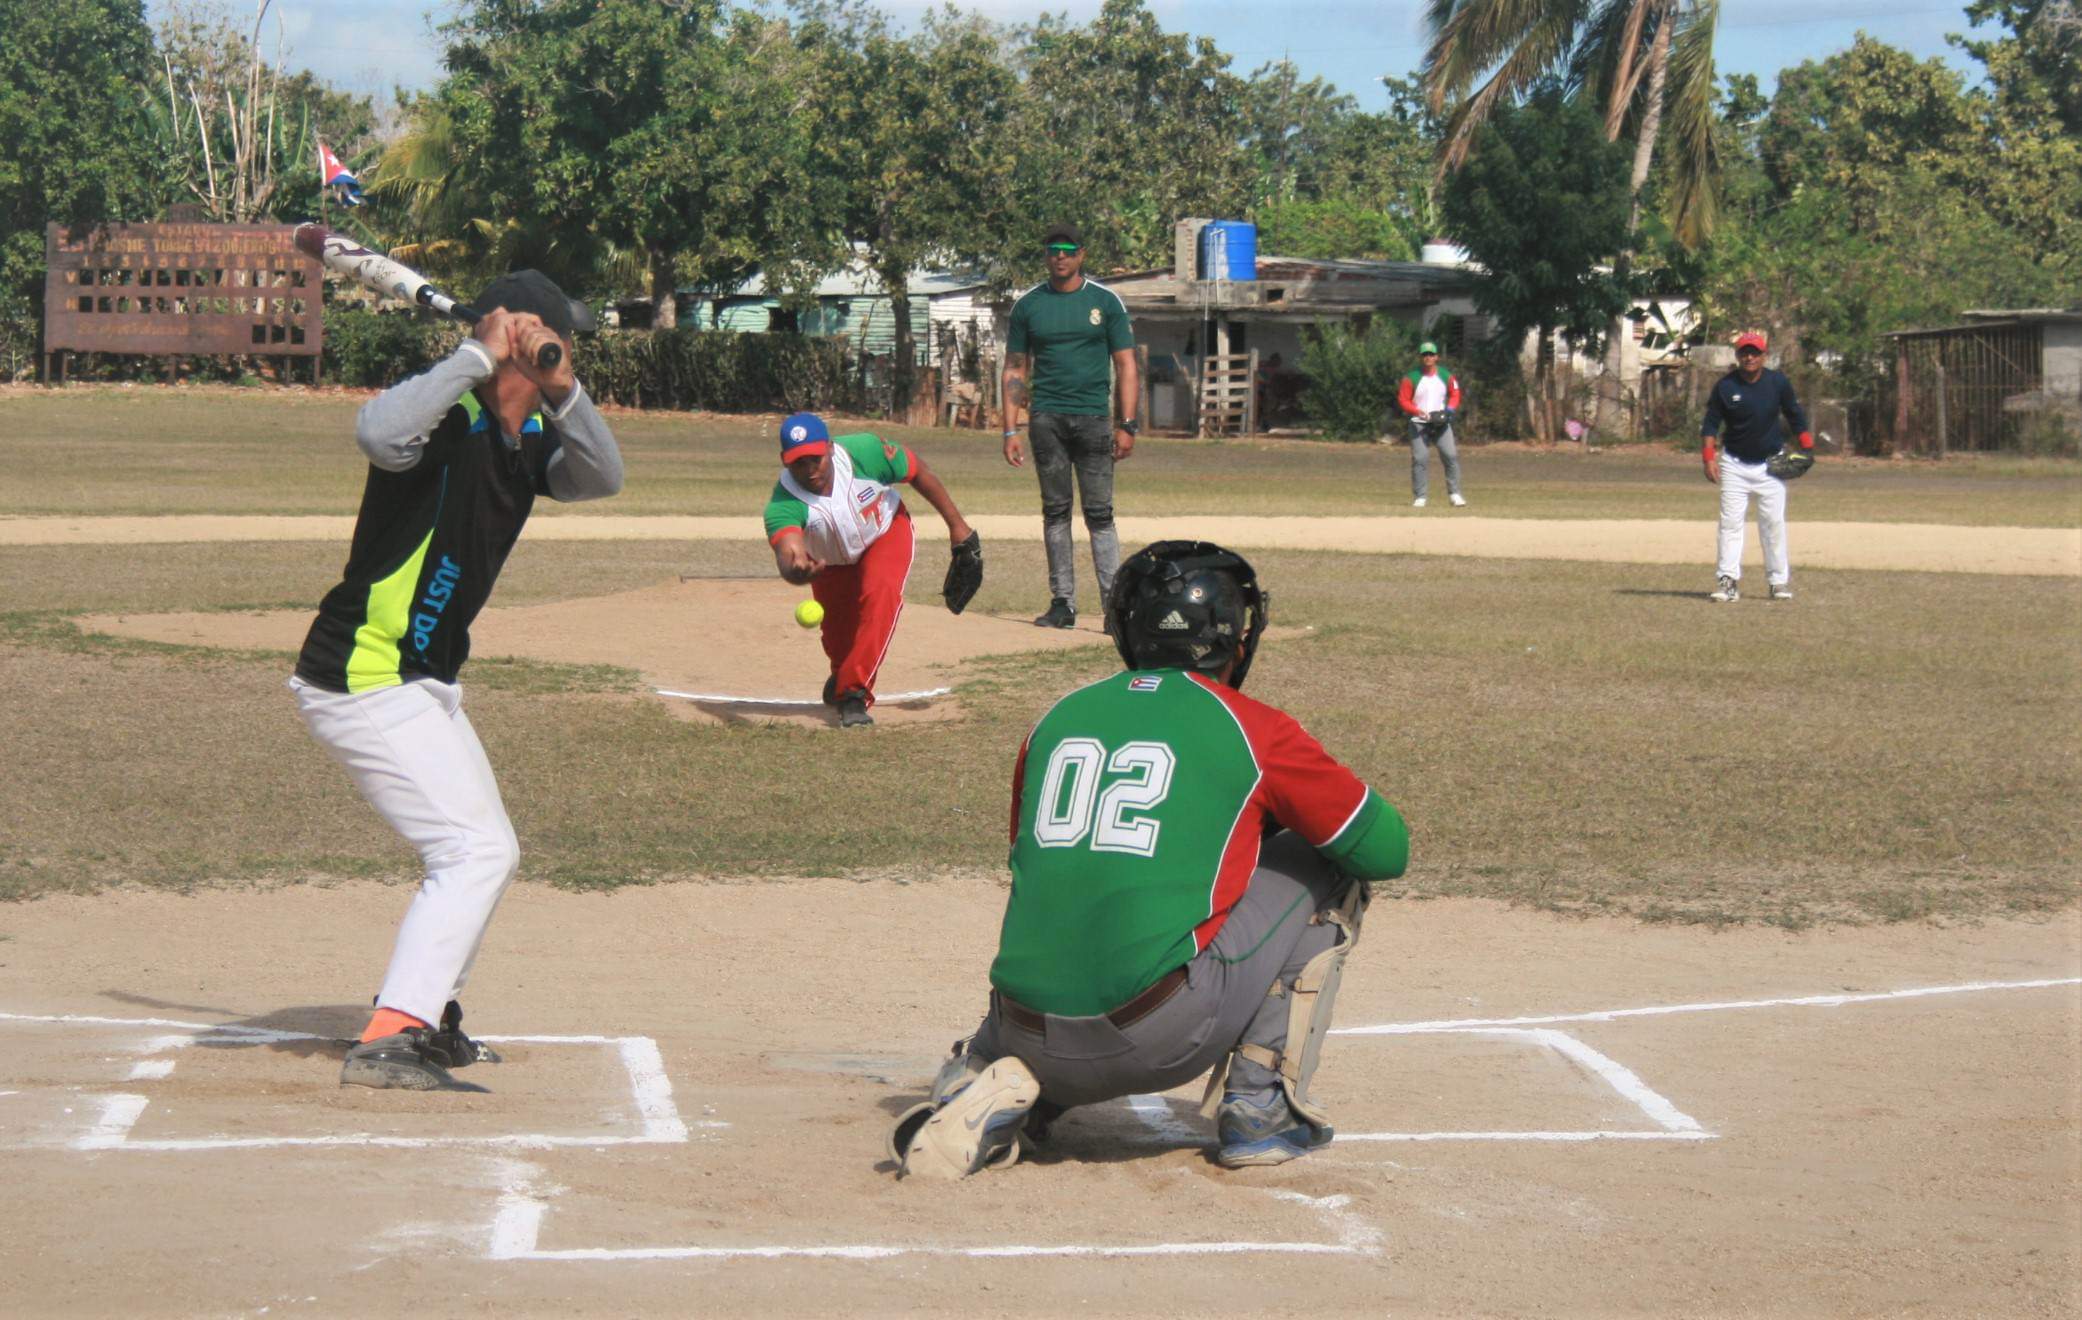 Las Tunas Sports Clubs plays the final of a softball tournament